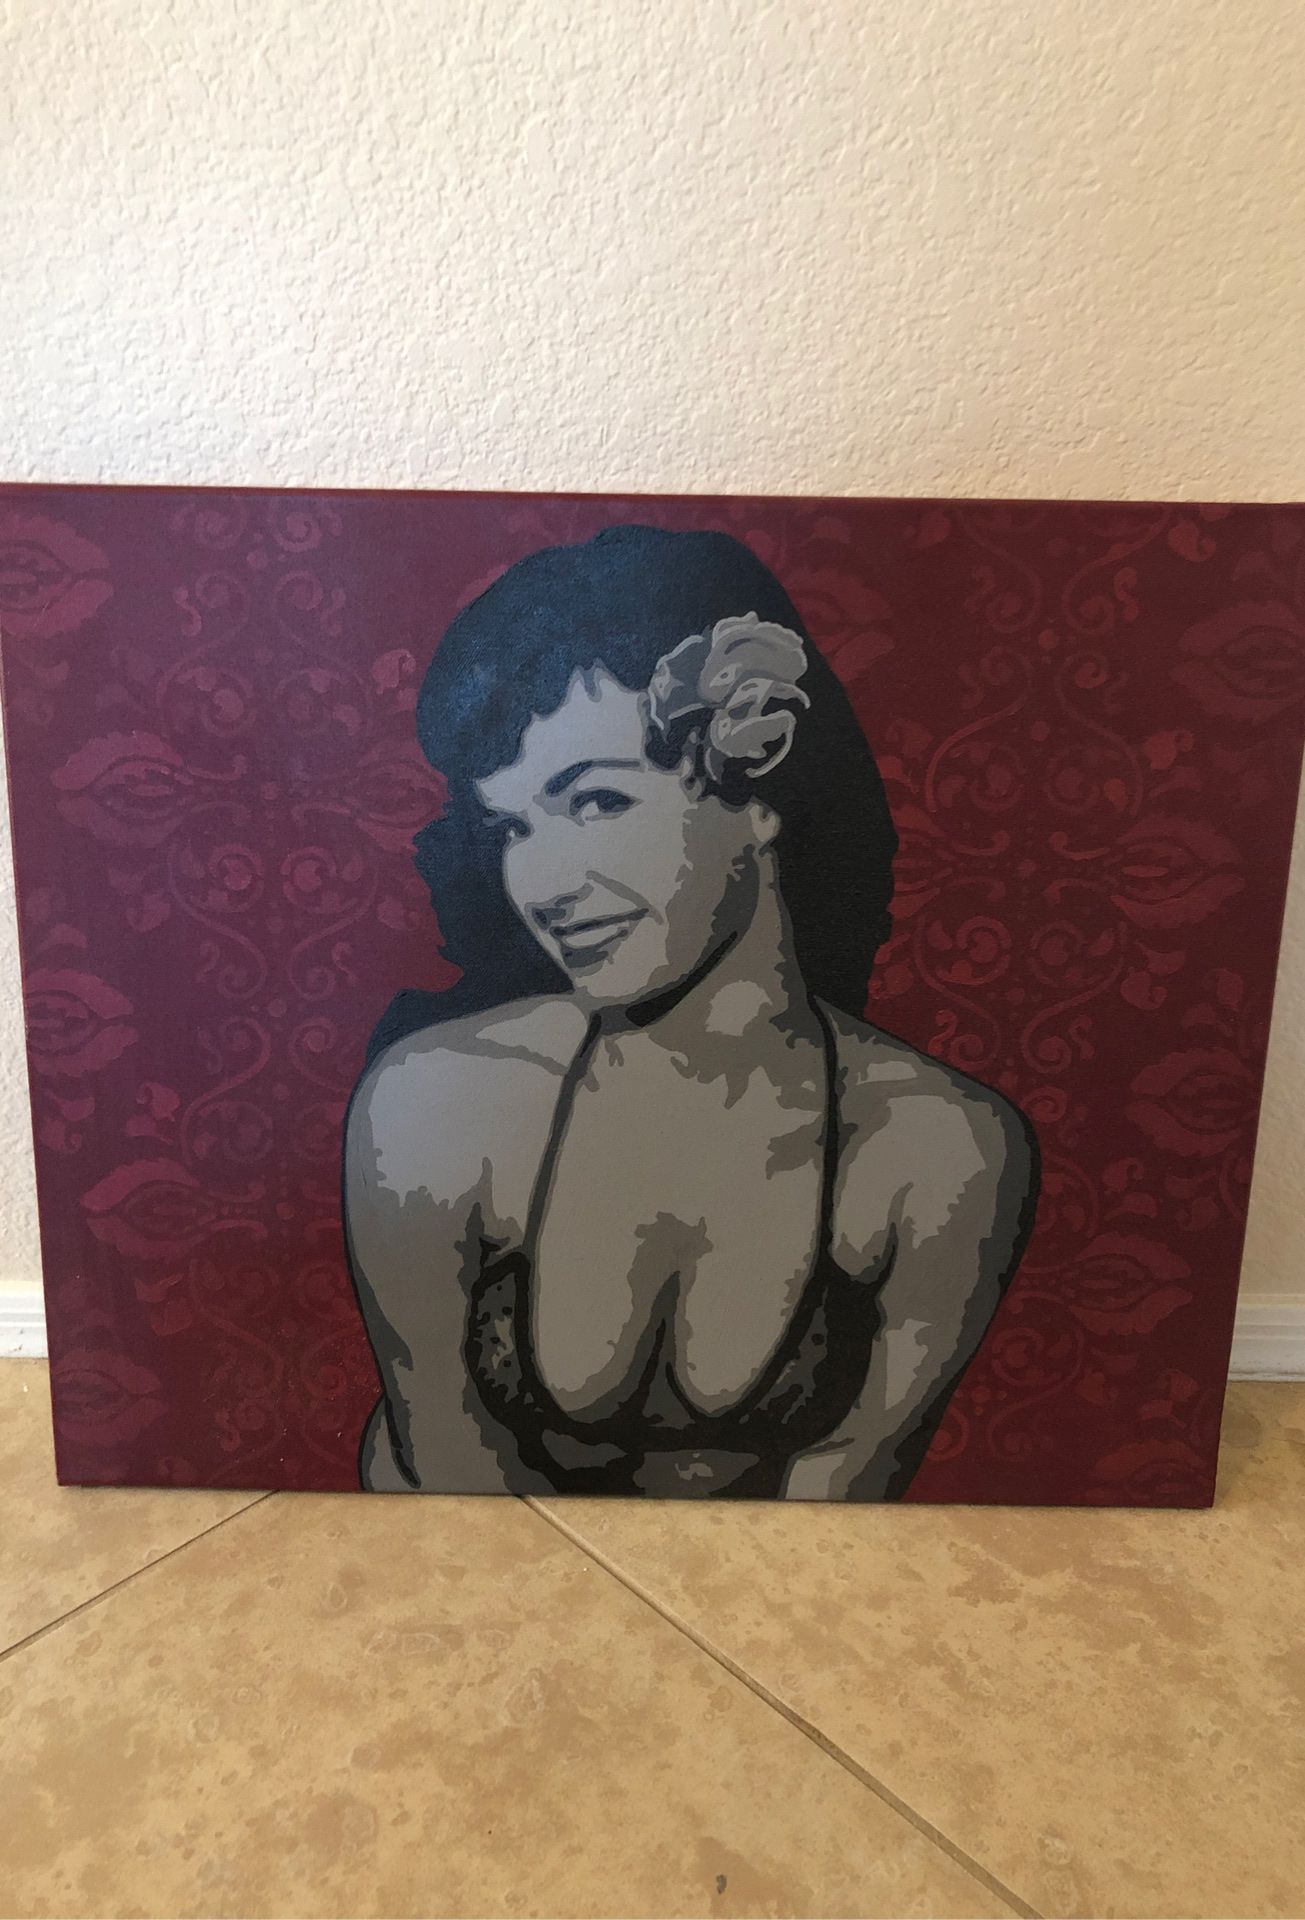 24”x 20” acrylic painting of Betty Page by hand